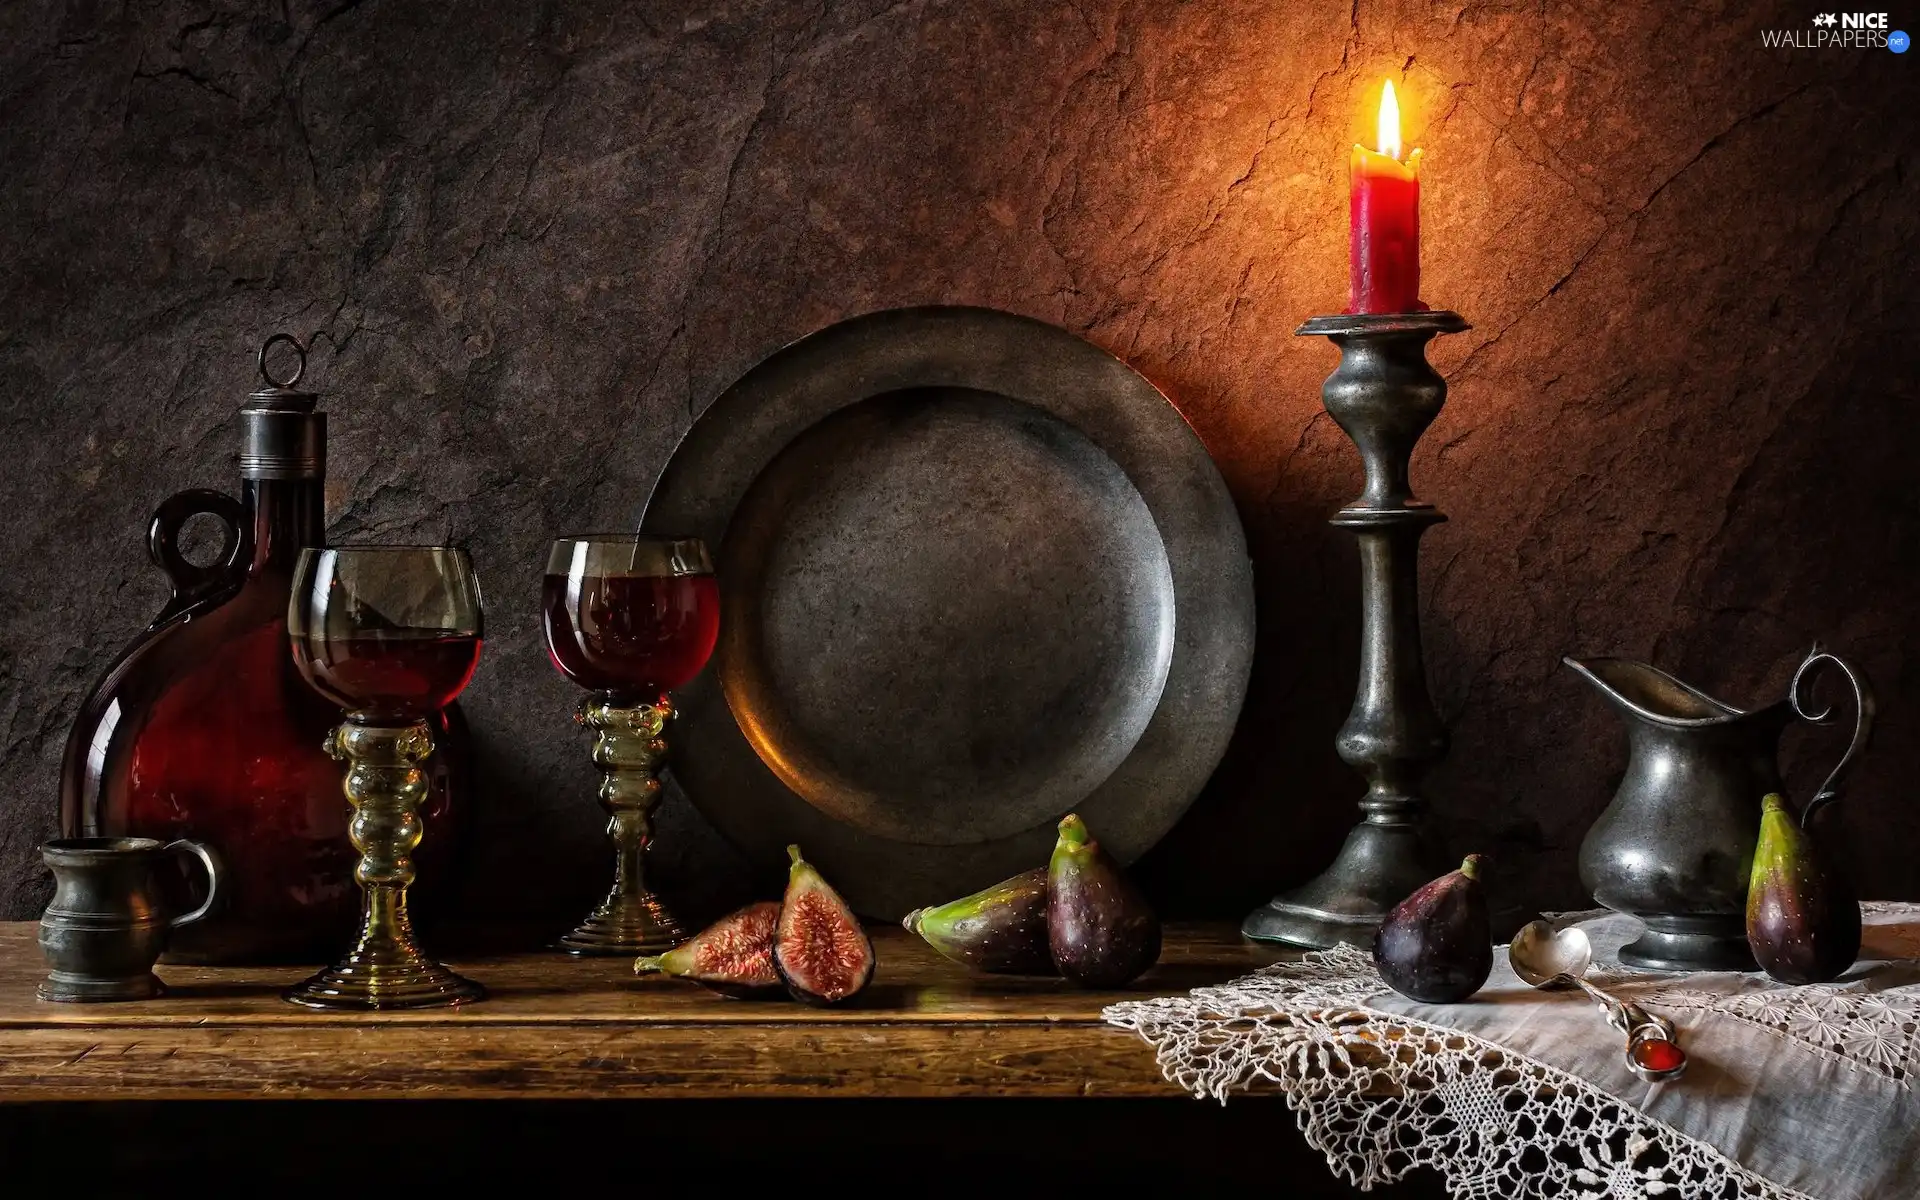 glasses, candle, figs, candlestick, napkin, plate, composition, carafe